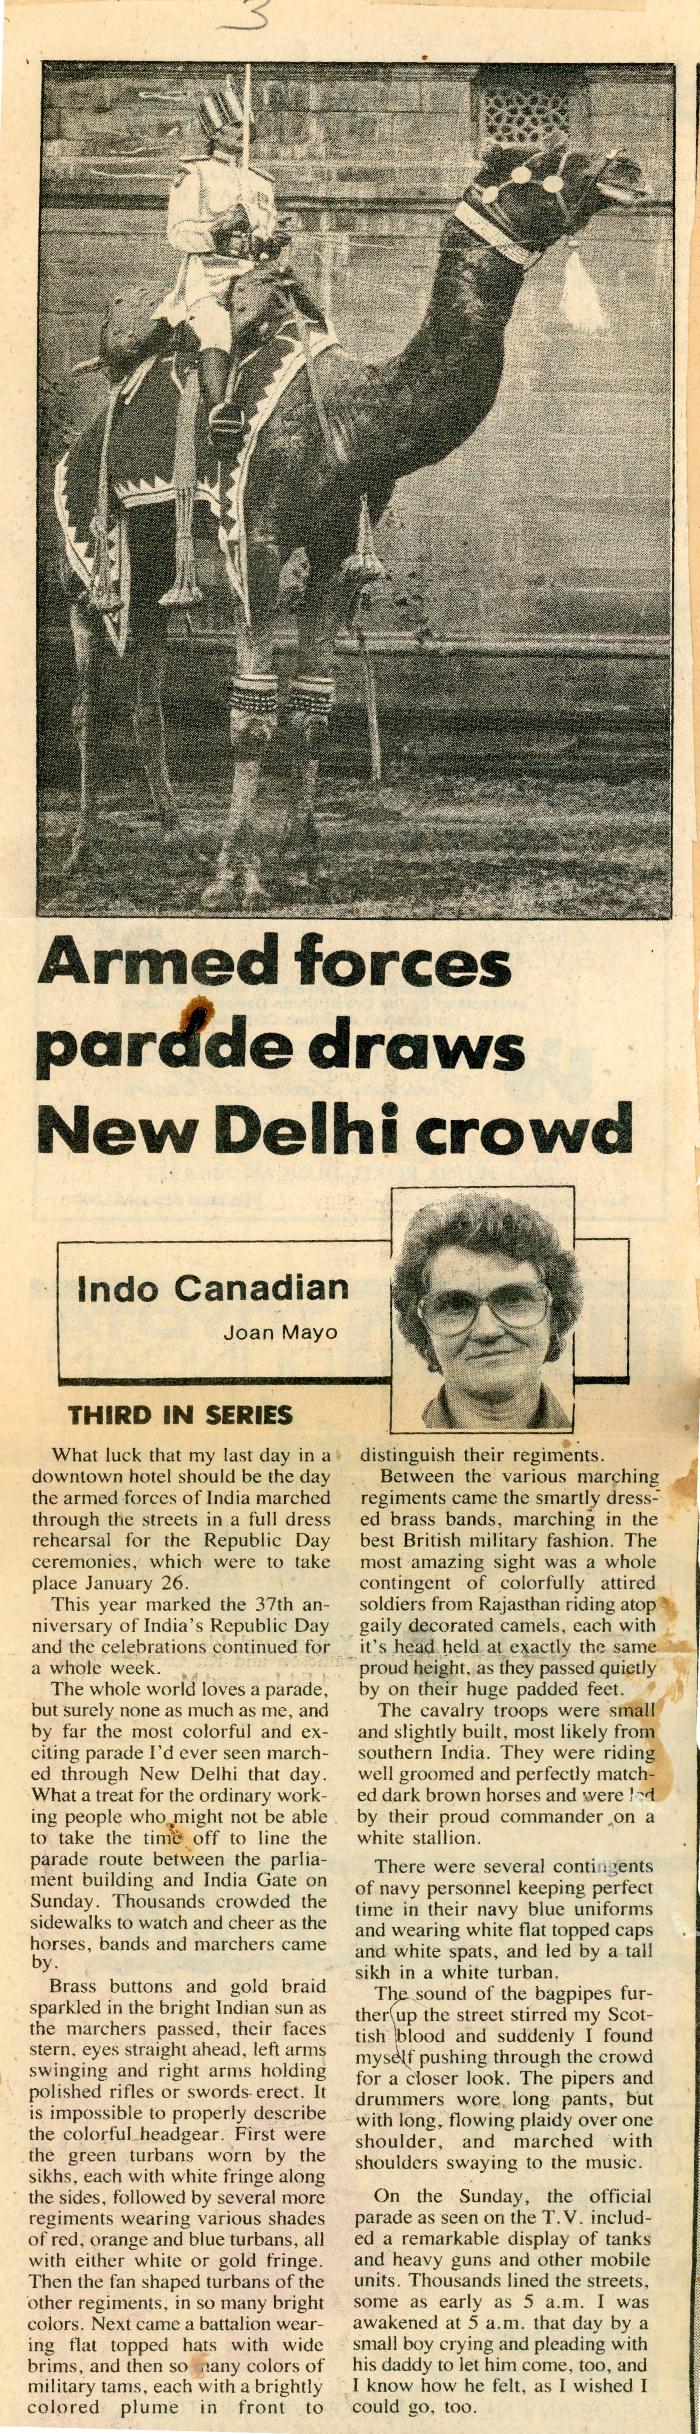 [Armed forces parade draws New Delhi crowd]